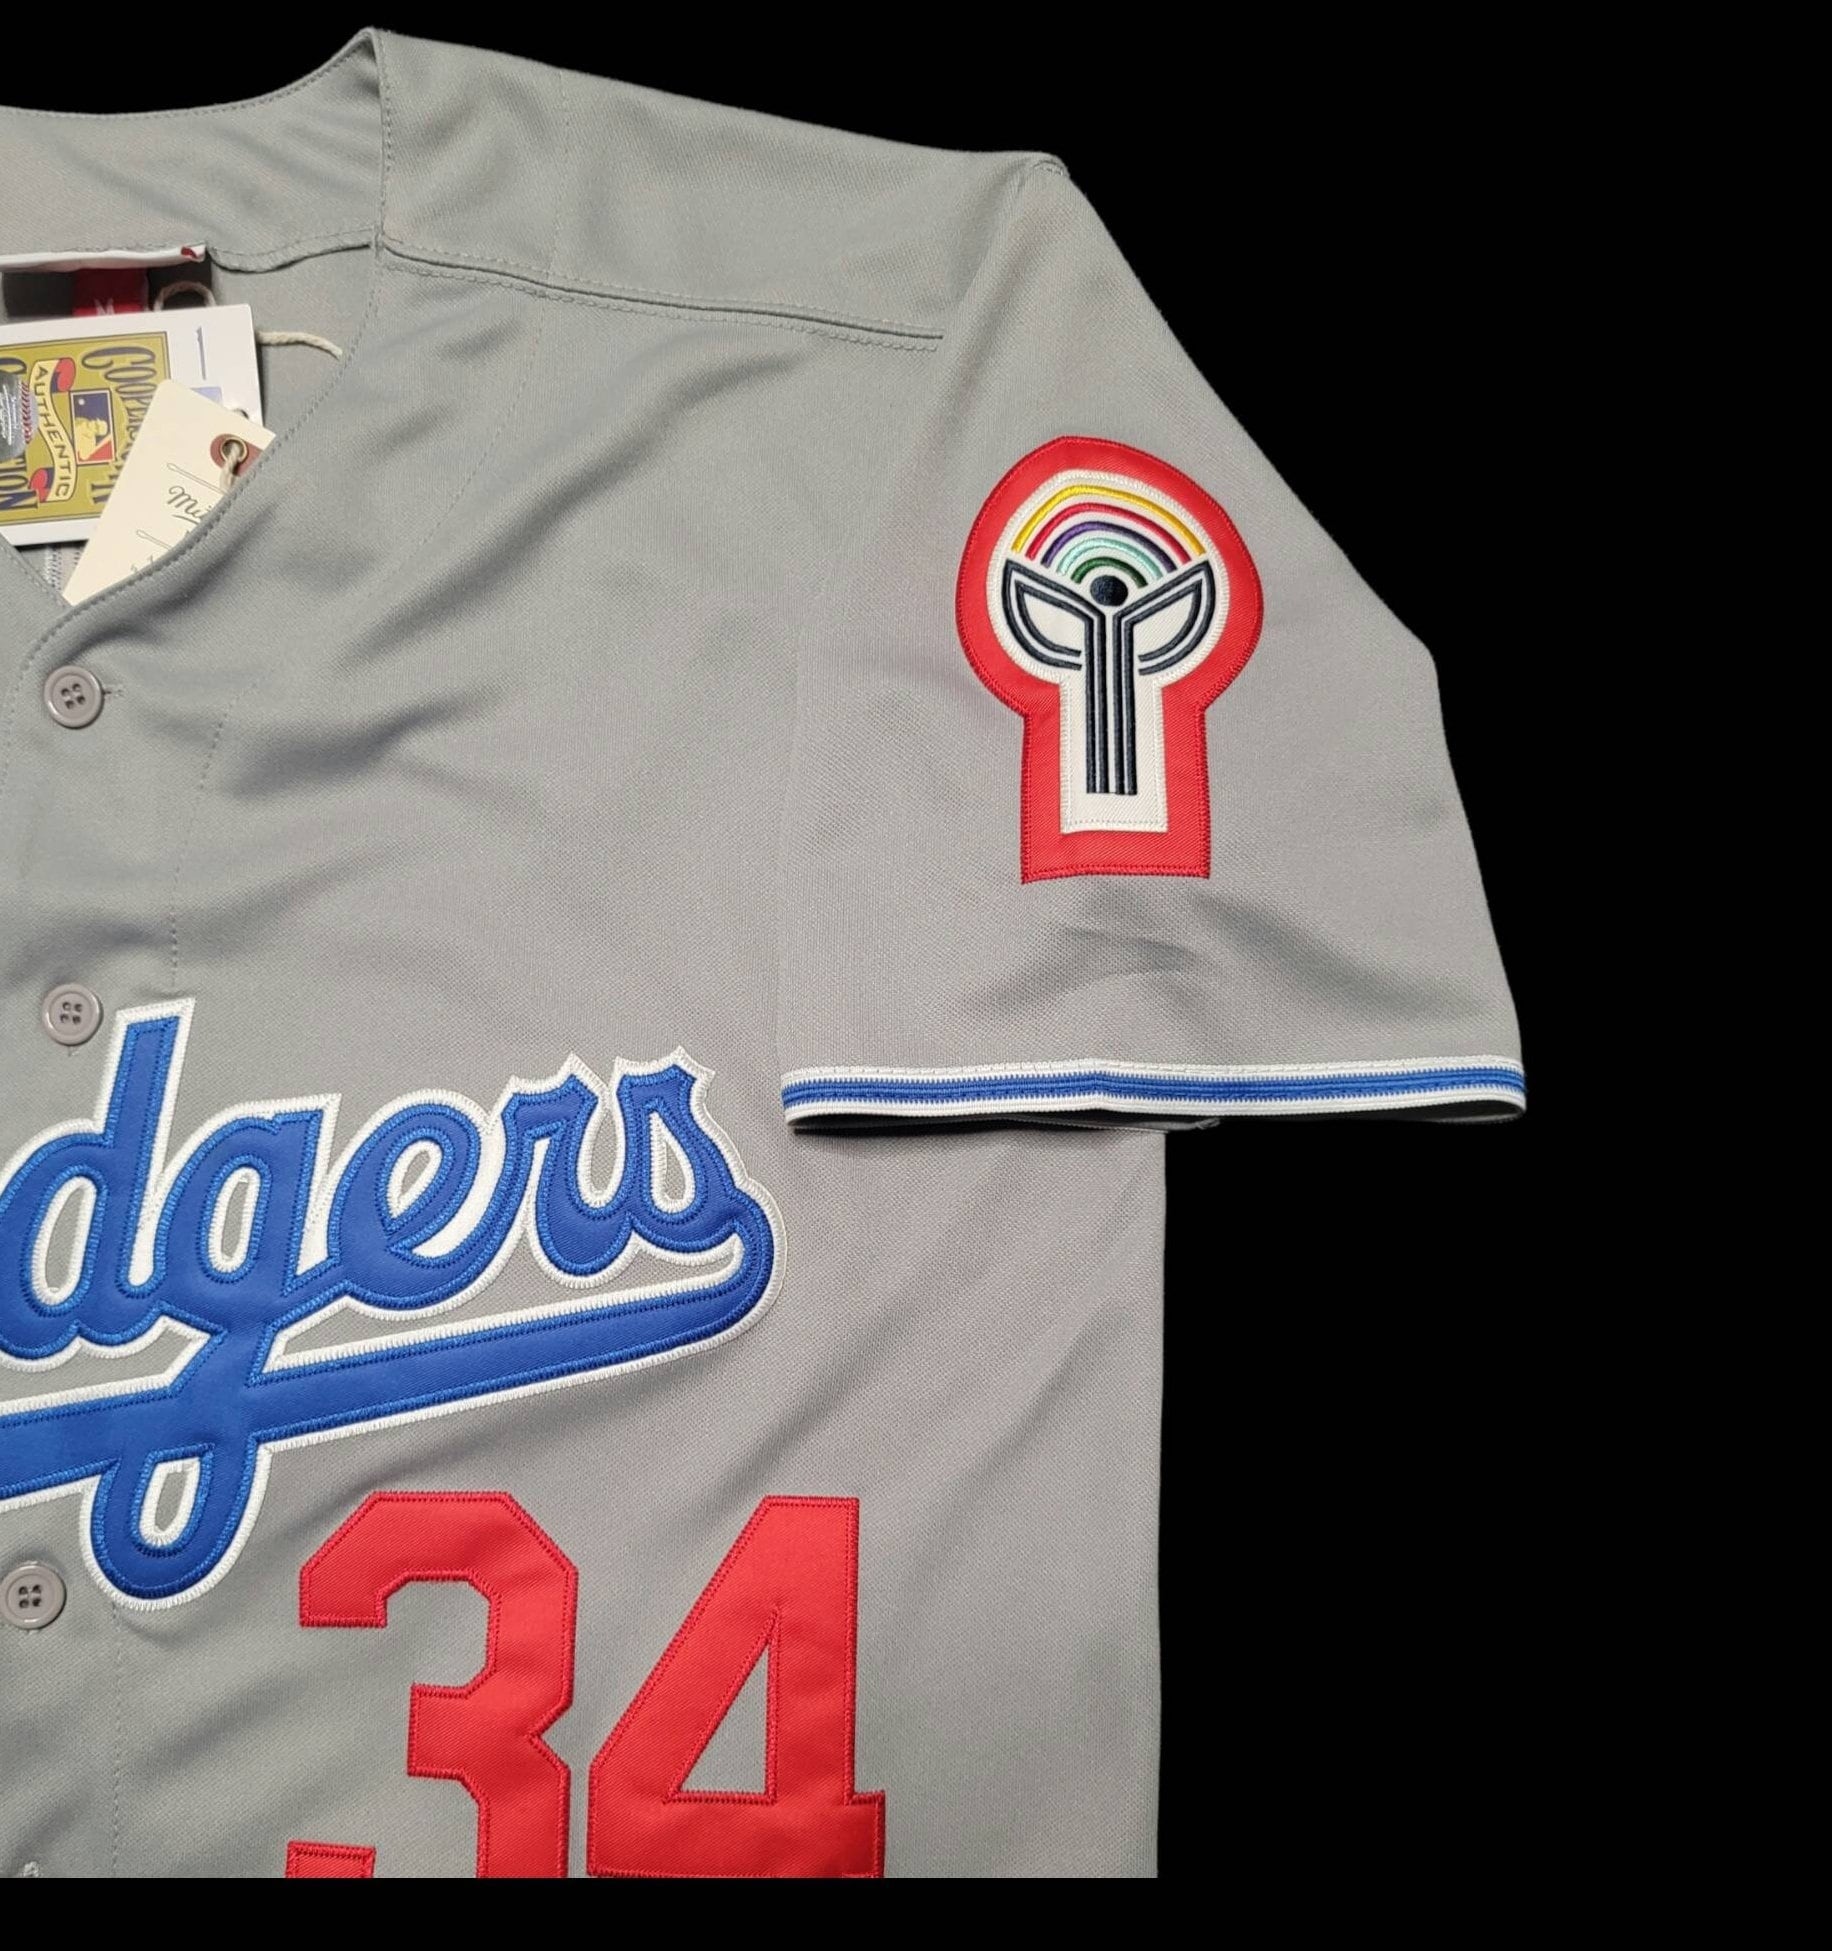 XclusiveTreasures Fernando Valenzuela Jersey Los Angeles Dodgers 1981 World Series Throwback Gray Birthday/Christmas Gift Idea! Sale! Limited Time Only! 3XL